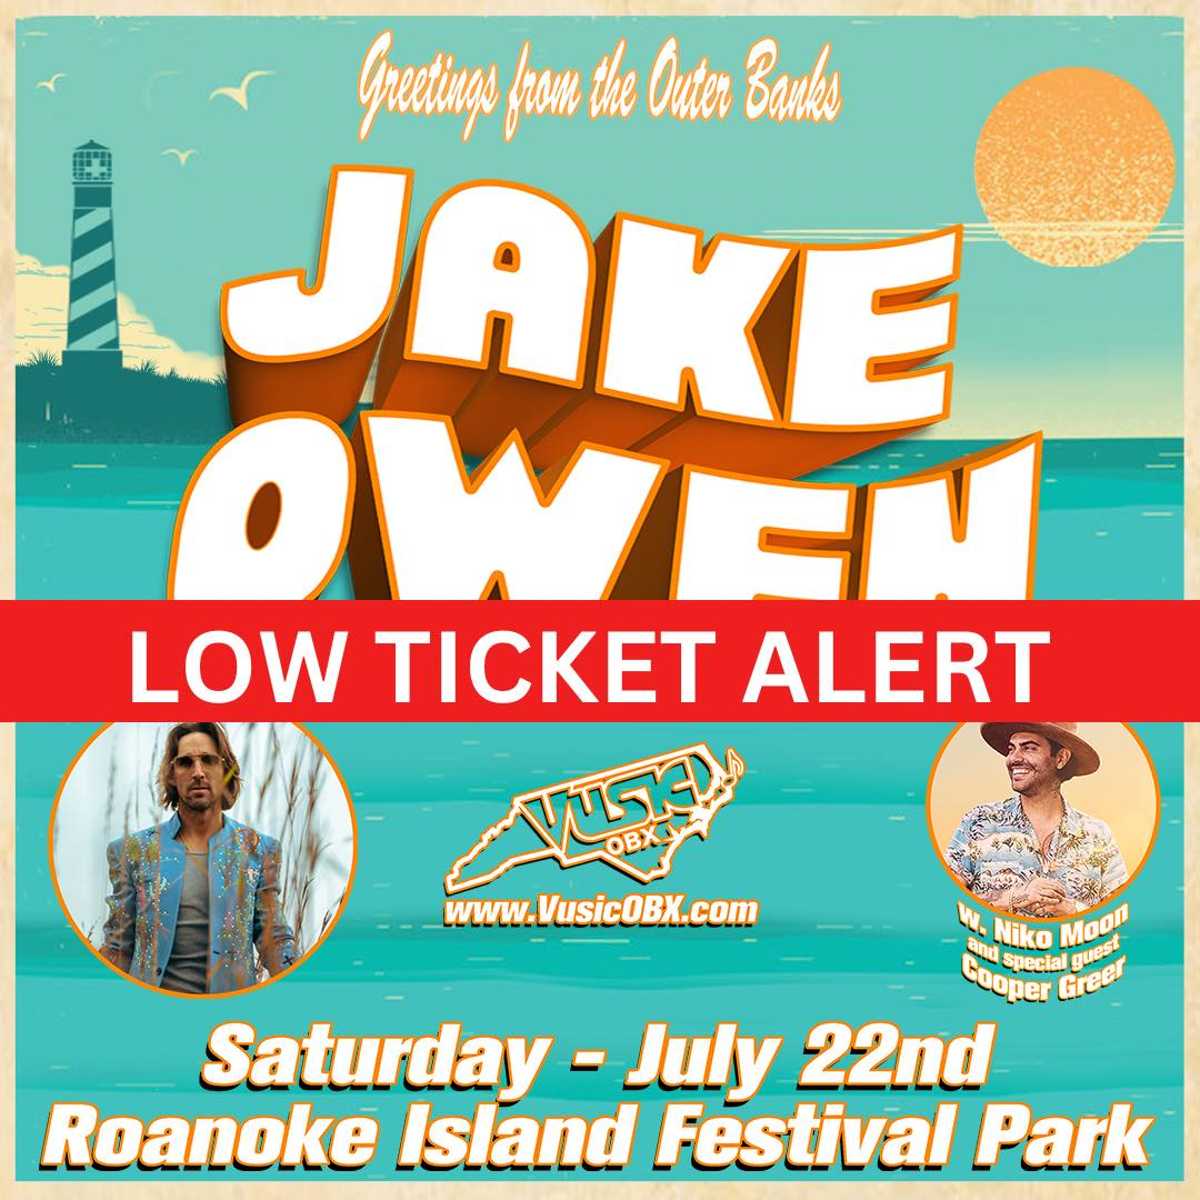 JAKE OWEN WITH NIKO MOON AND COOPER GREER